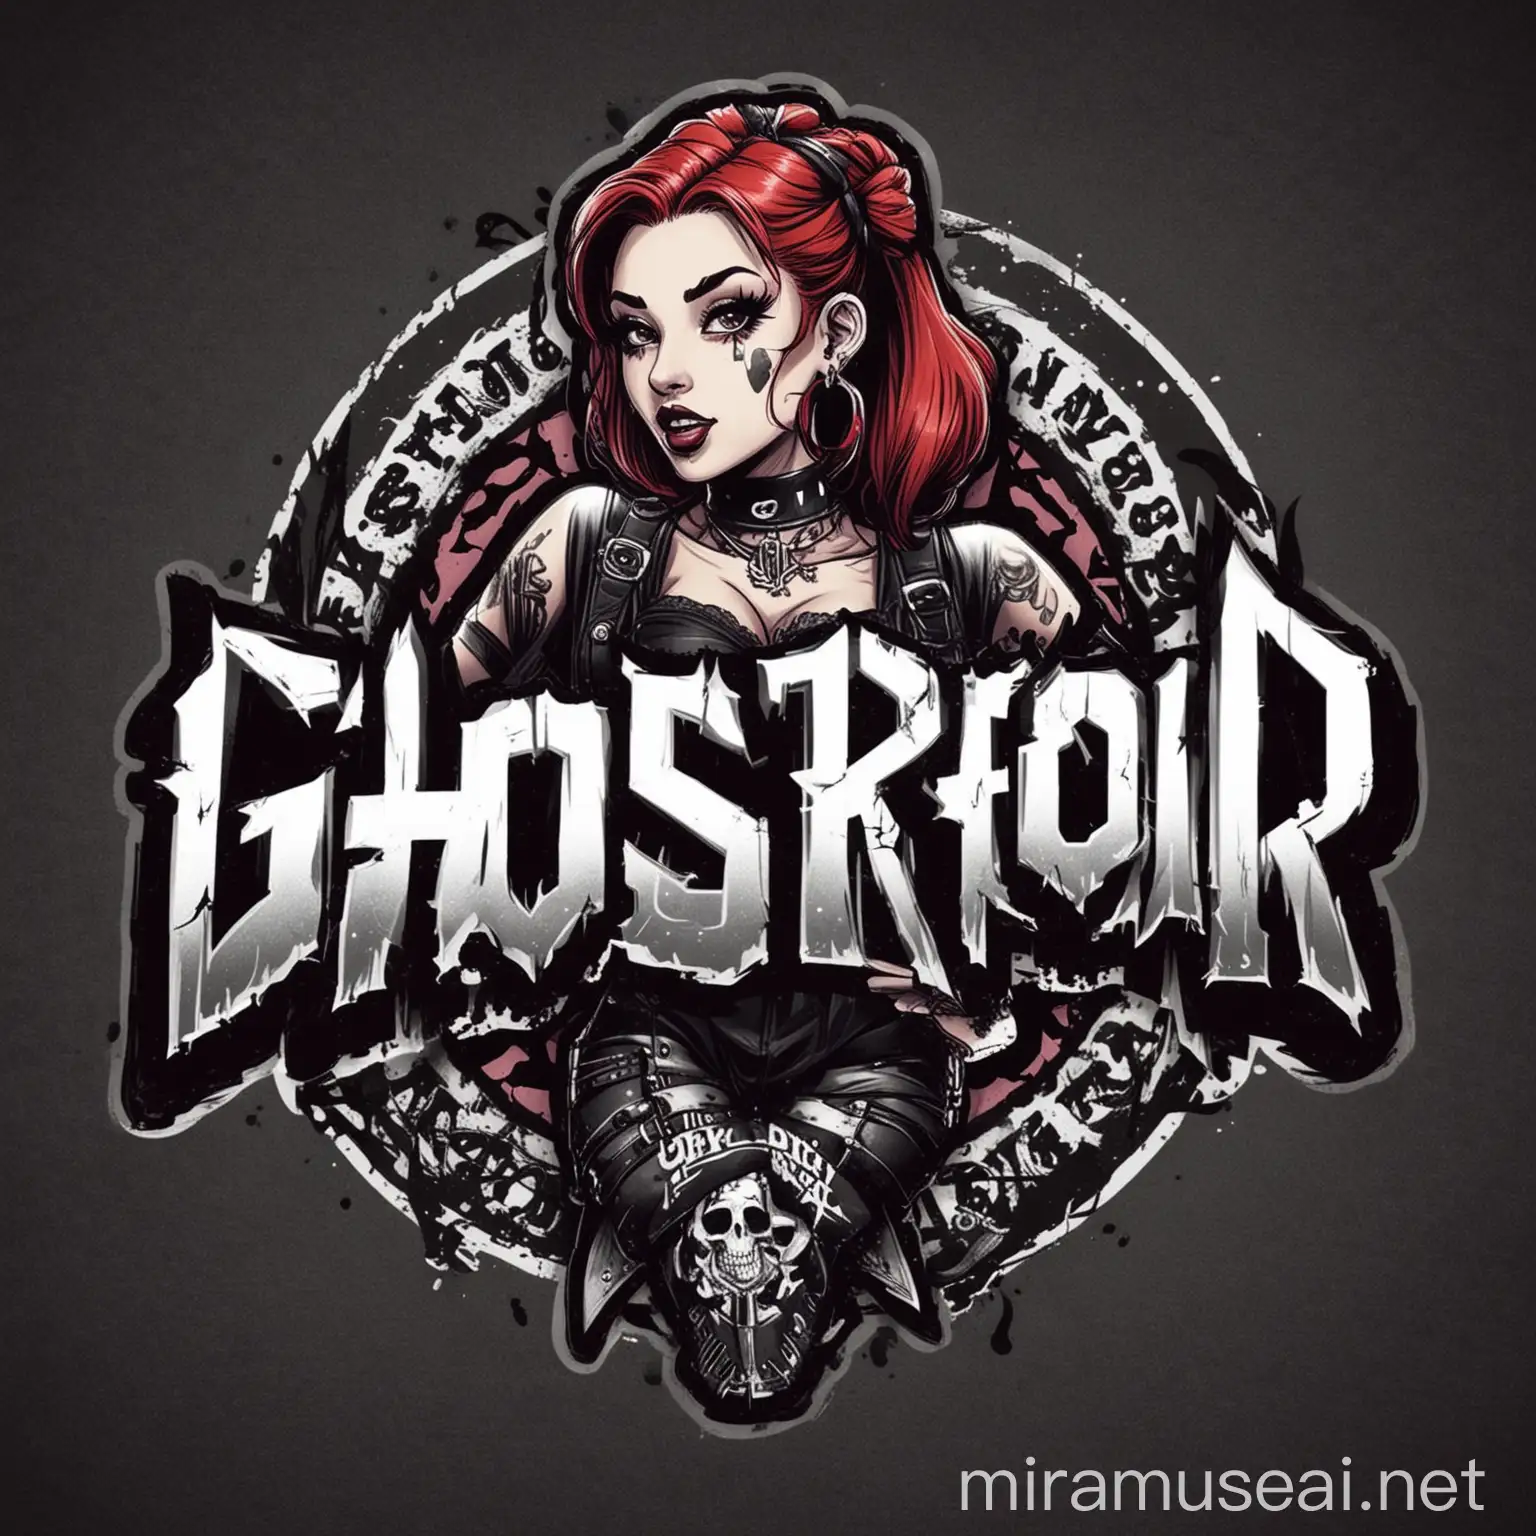 Ghotroid Girl Group Logo Pop Punk with a Nu Metal Twist